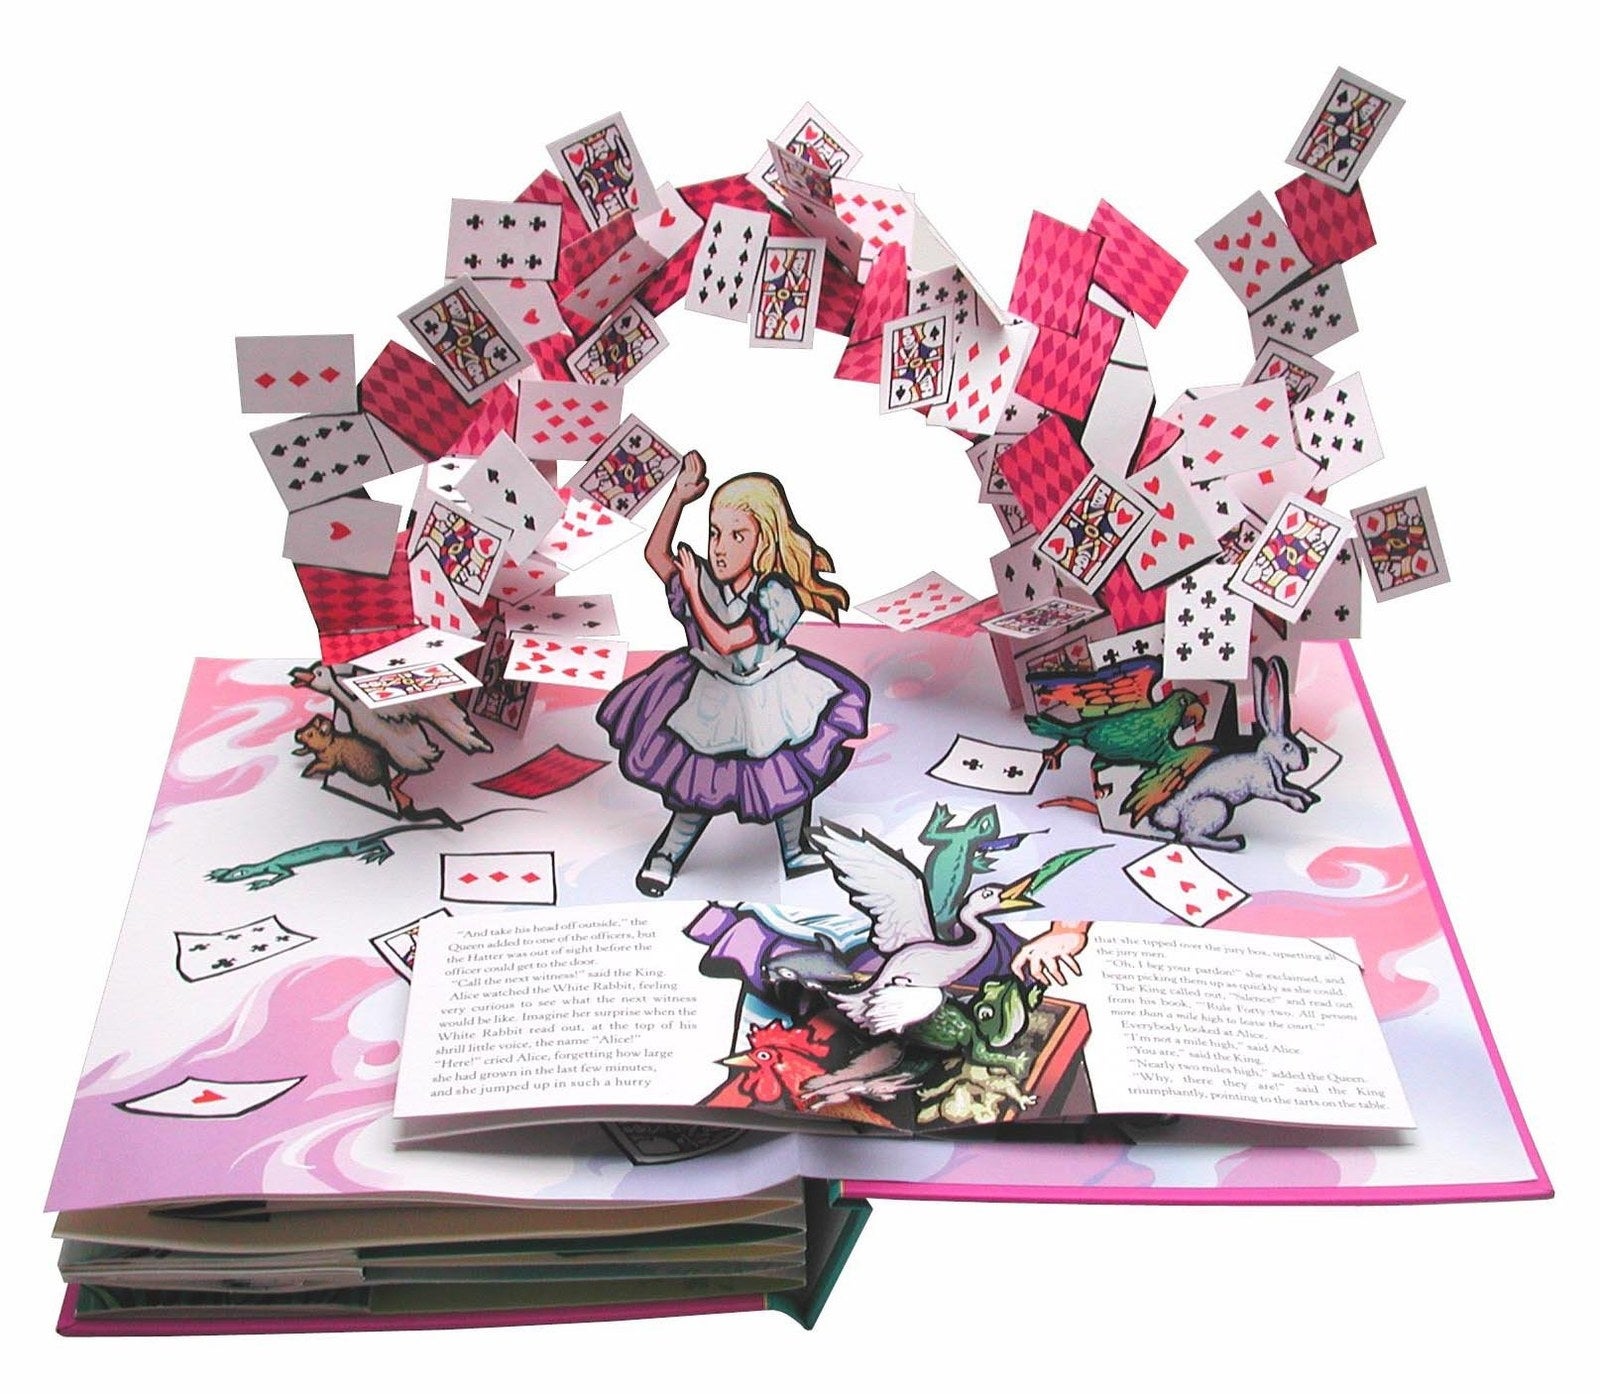 19 Pop-Up Books Adults Won't Want To Share With Their Kids